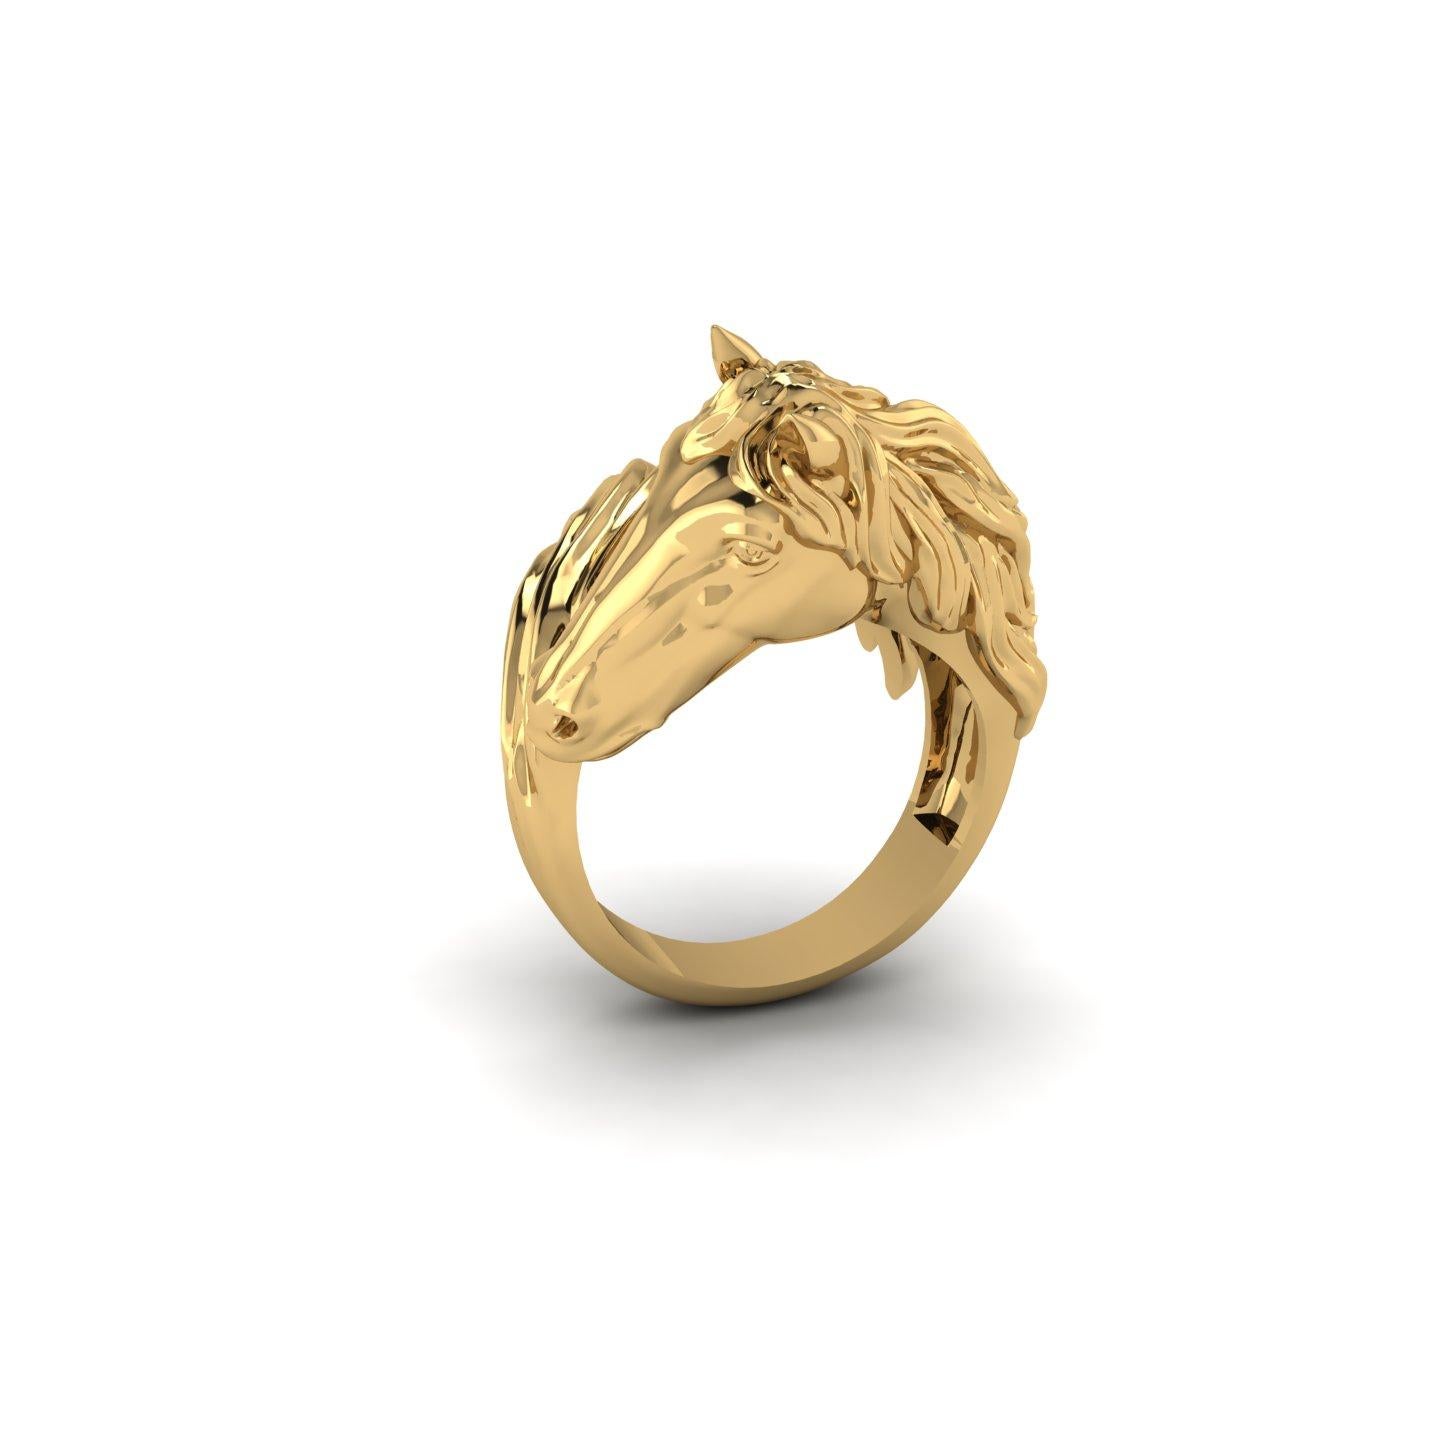 The Horse Contrarie Tail Ring  entirely made in 18k Solid Yellow Gold, no platings, incredibly detailed, made to order of your size each time, due to the finger size fitting importance.
This is a solid piece of 18k Yellow Gold, with its weight, for